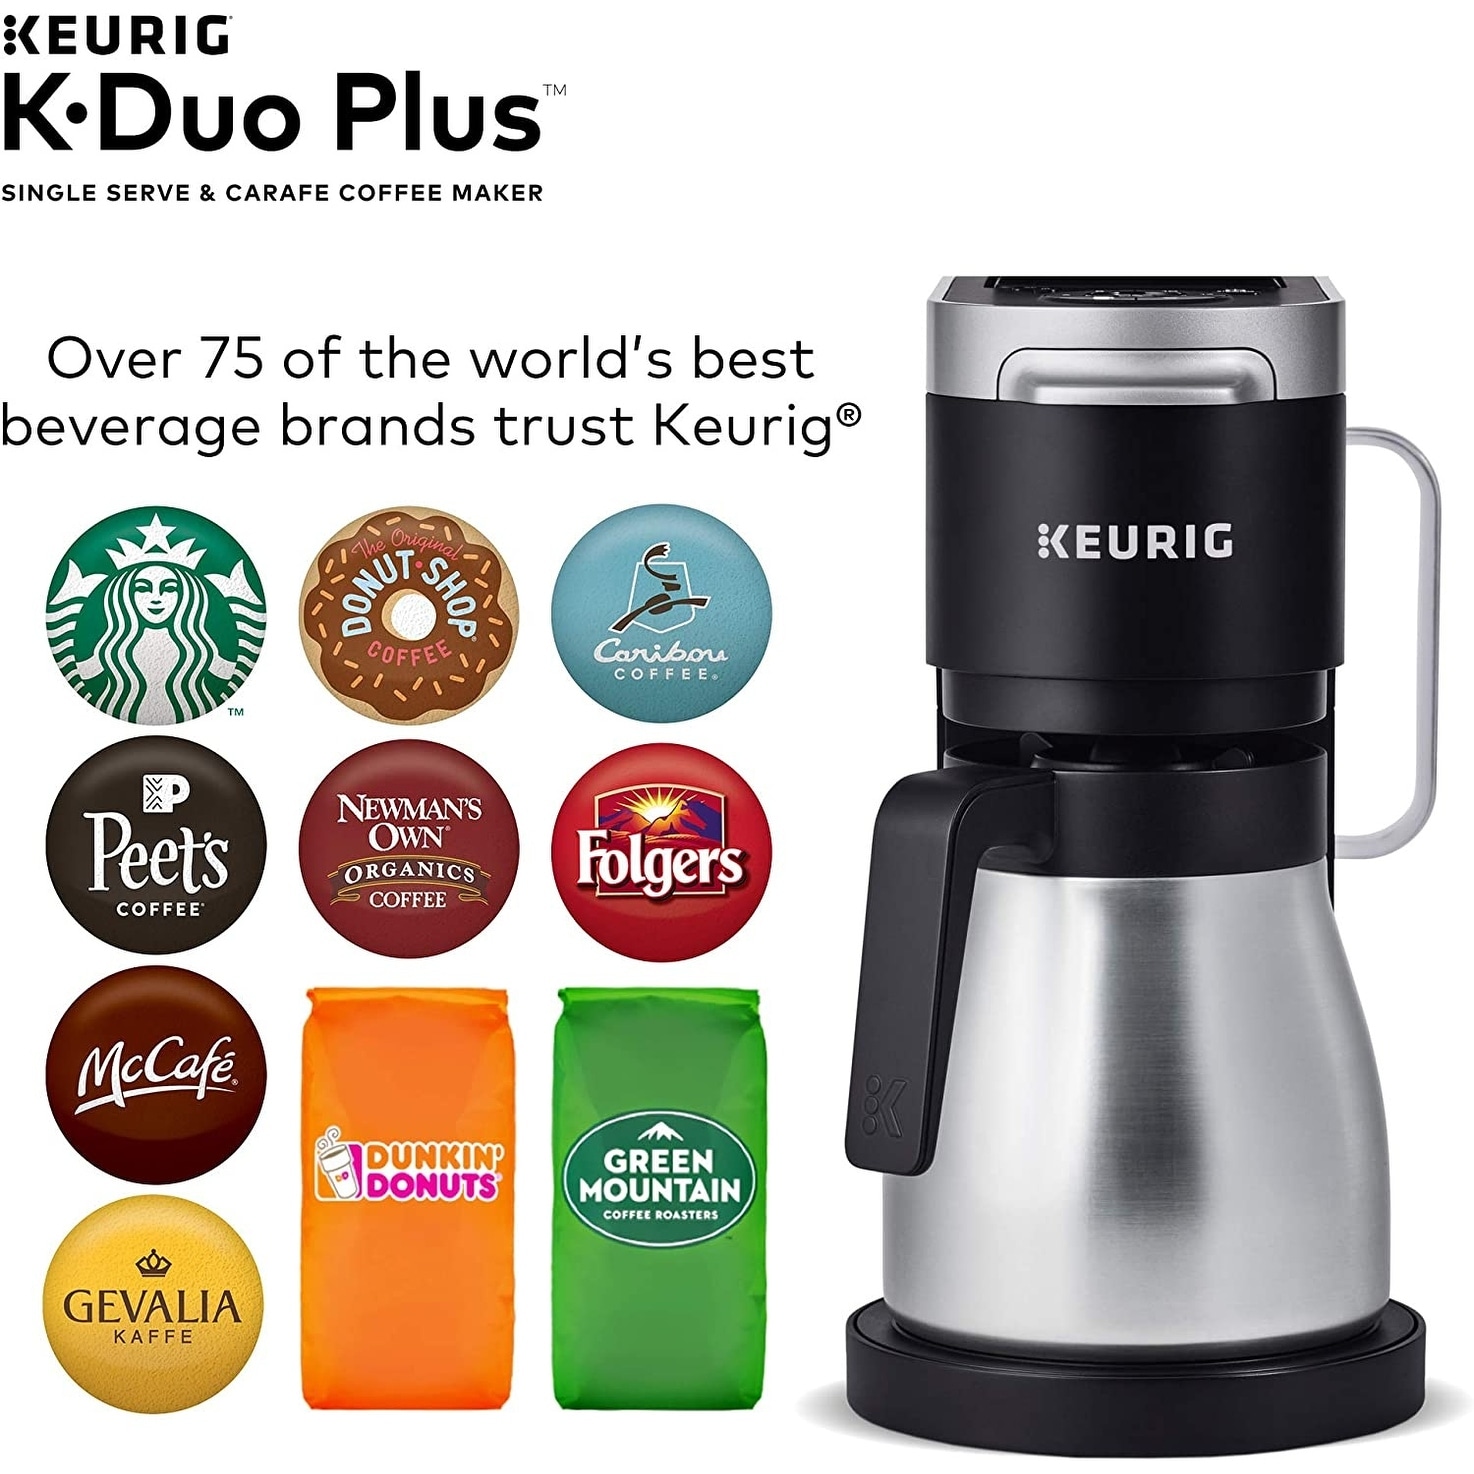 https://ak1.ostkcdn.com/images/products/is/images/direct/a5e75c9faf6b4b1f81c0a4b8557d679f5011cb41/Keurig-K-Duo-Plus-Coffee-Maker-%28Black%29.jpg